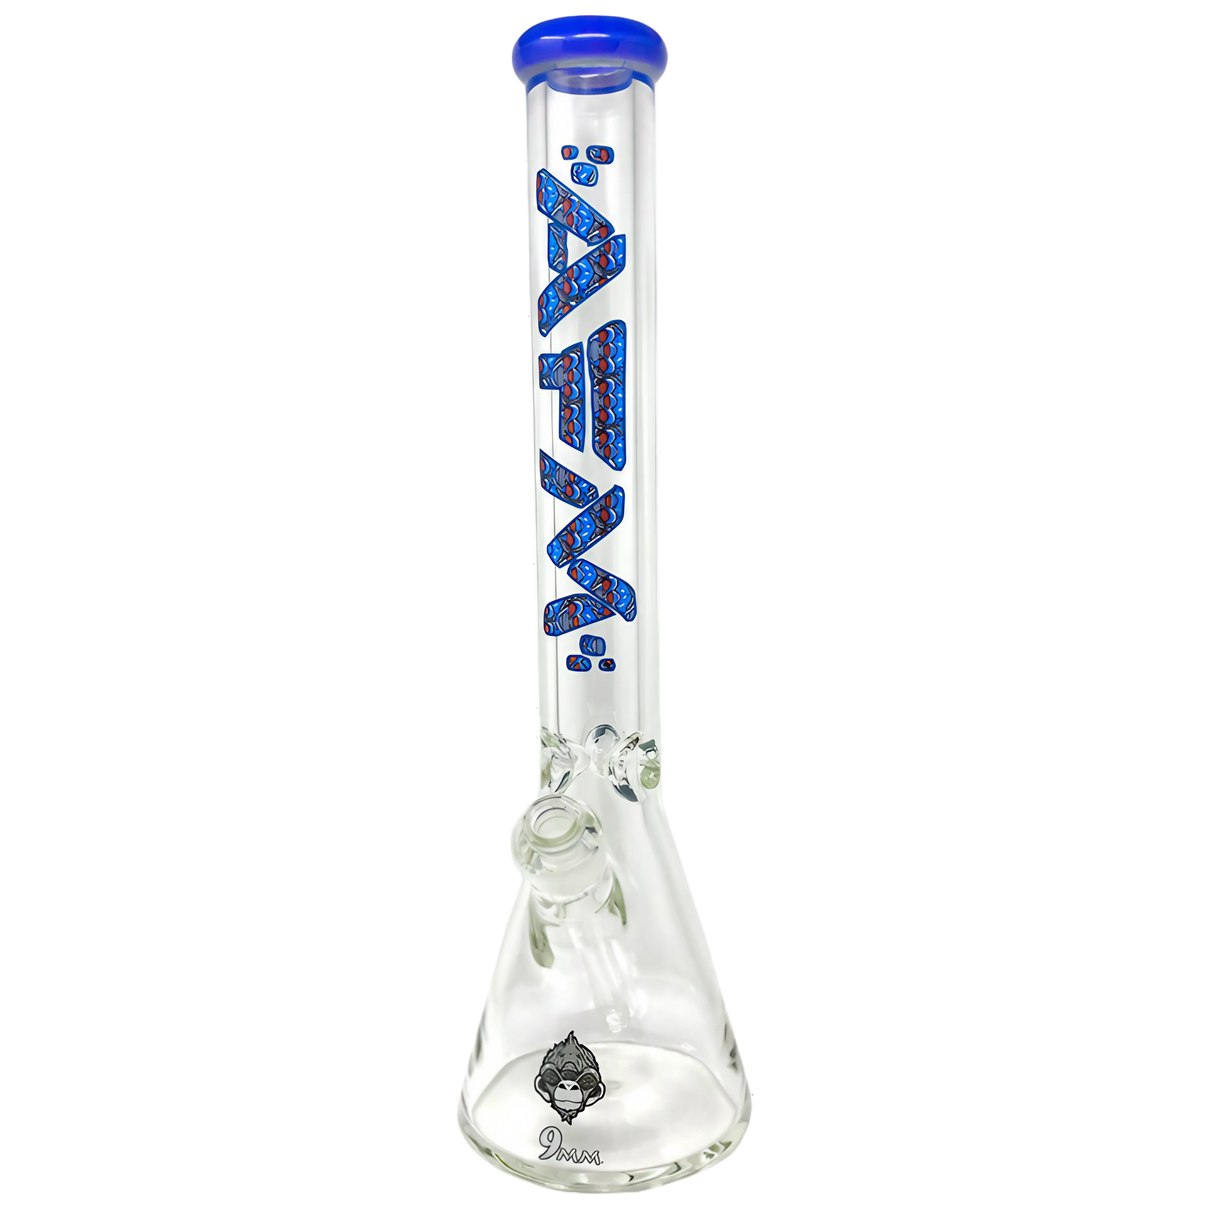 AFM Glass - Beaker 18" 9mm Bong Front View with Blue Accents for Dry Herbs